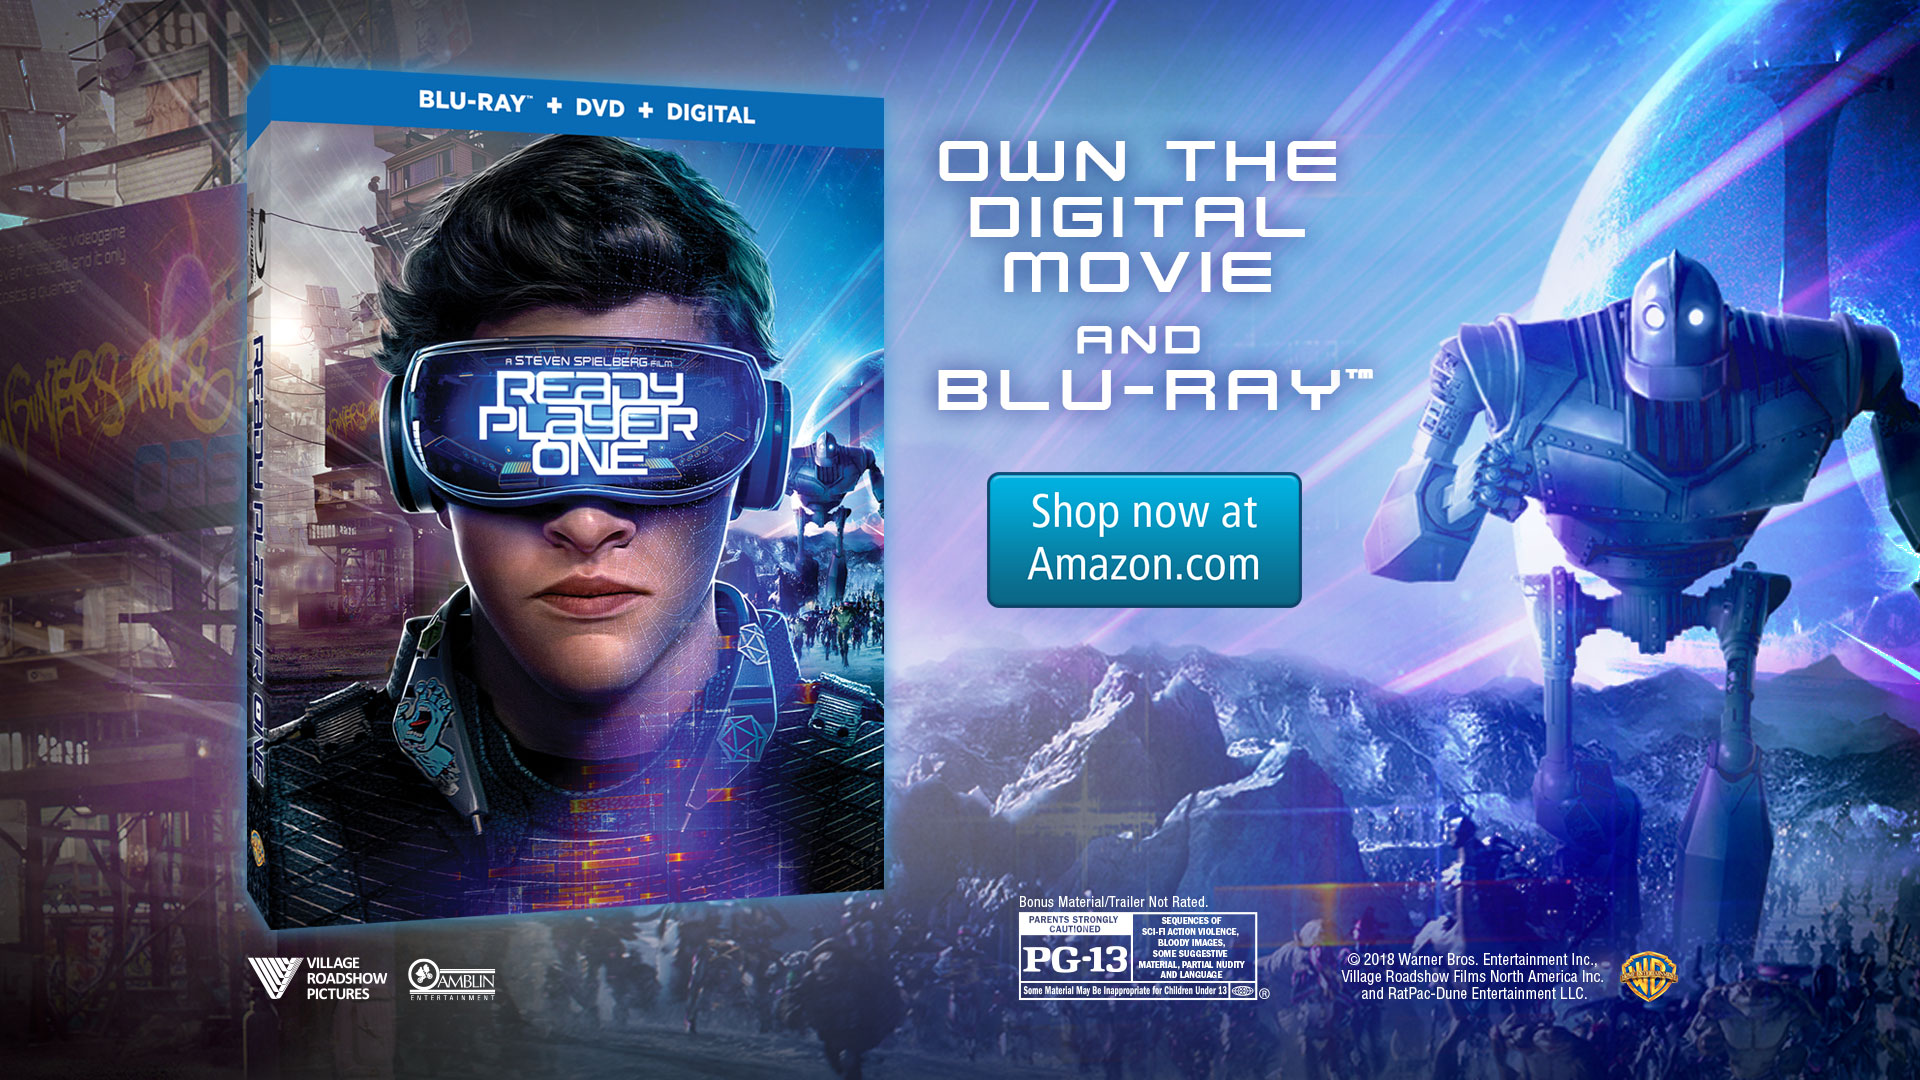 Ready Player One Digital Movie and Blu-Ray™